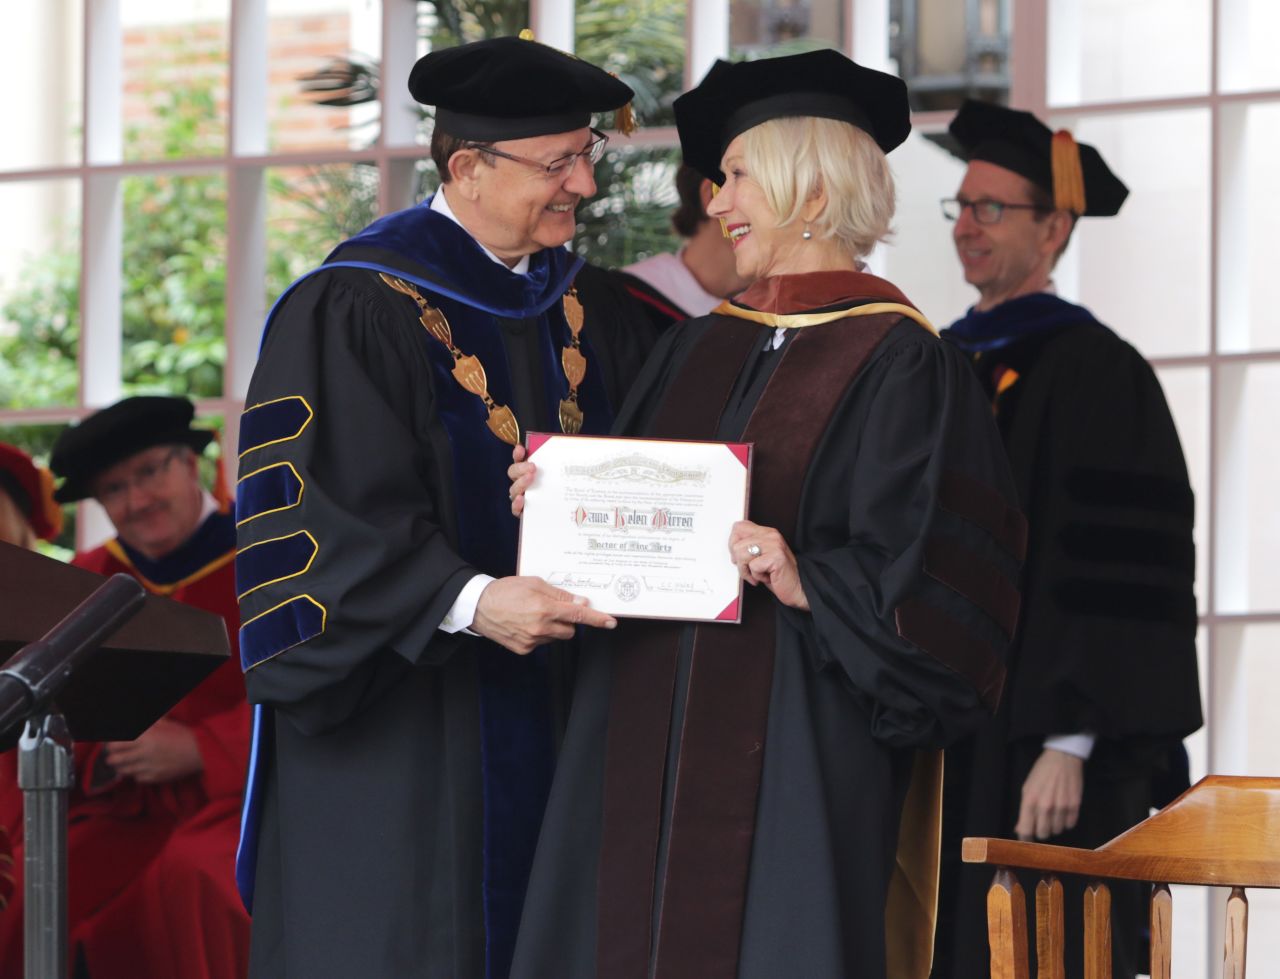 In 2017, Mirren is presented with an honorary doctorate degree by the University of Southern California President C.L. Max Nikias.